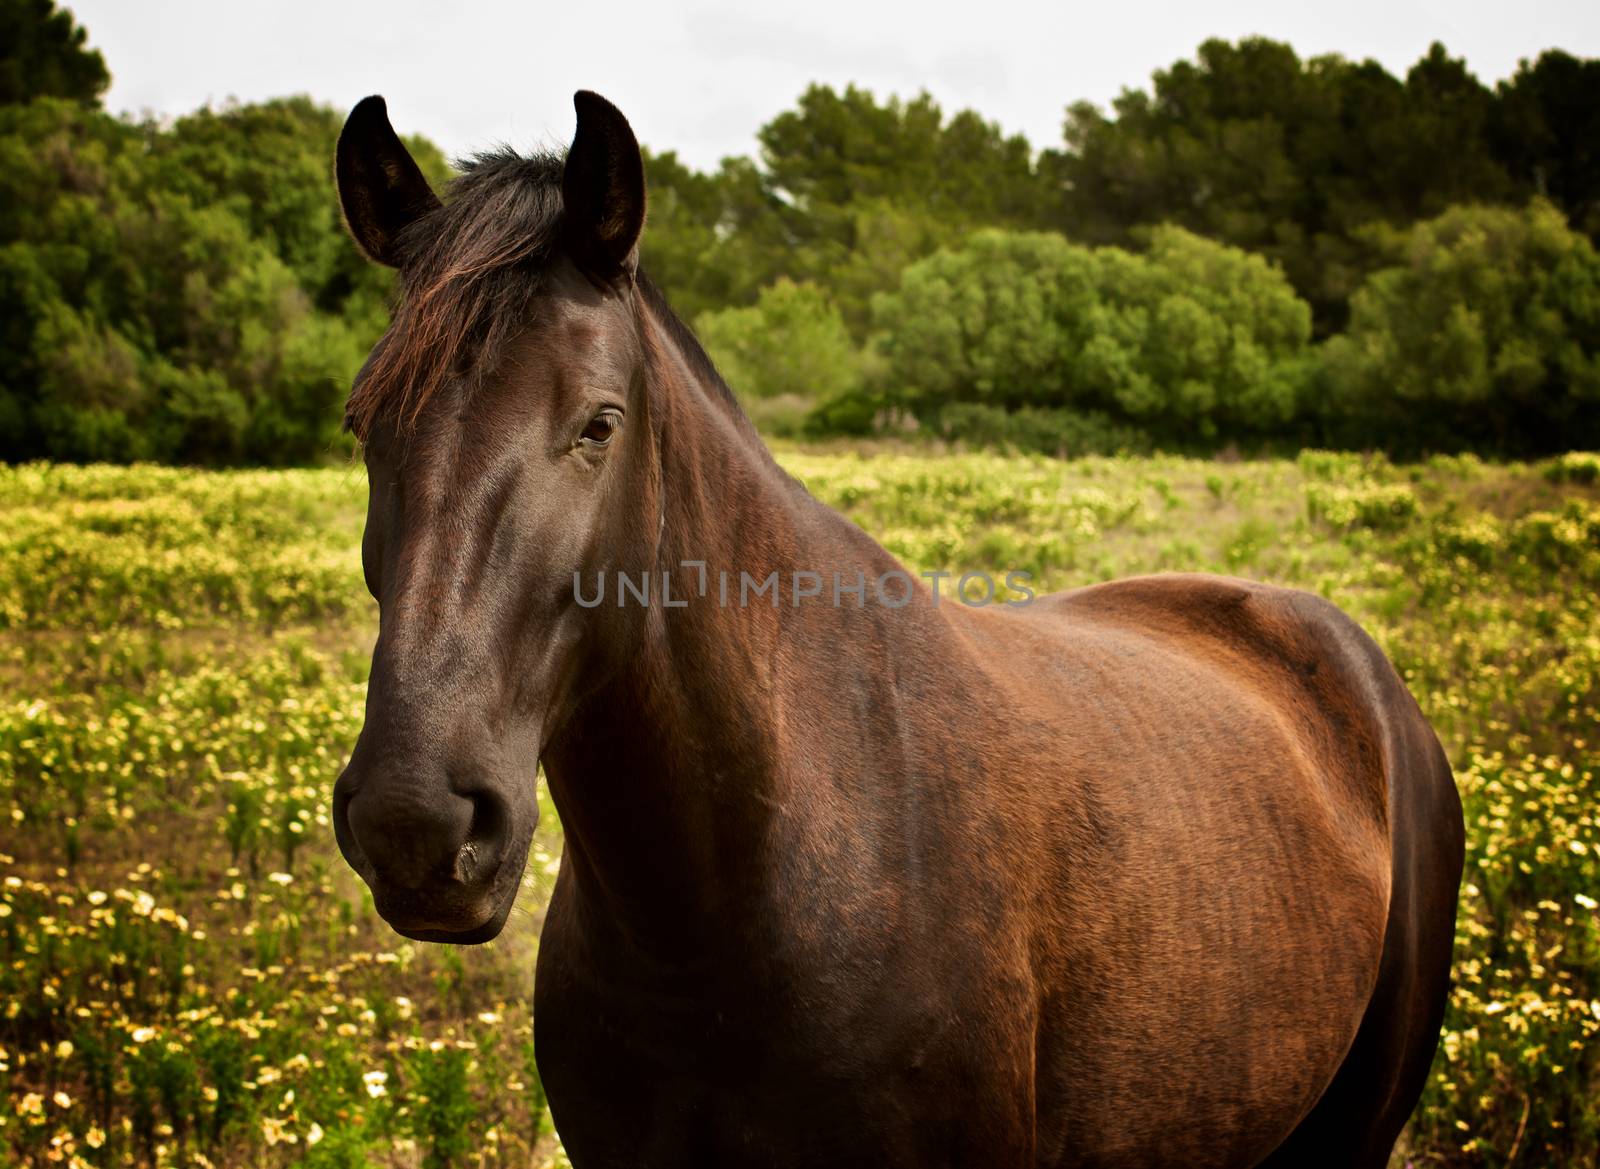 Beautiful Brown Horse Breed Caballos Baleares closeup on Field with Yellow Flowers Outdoors